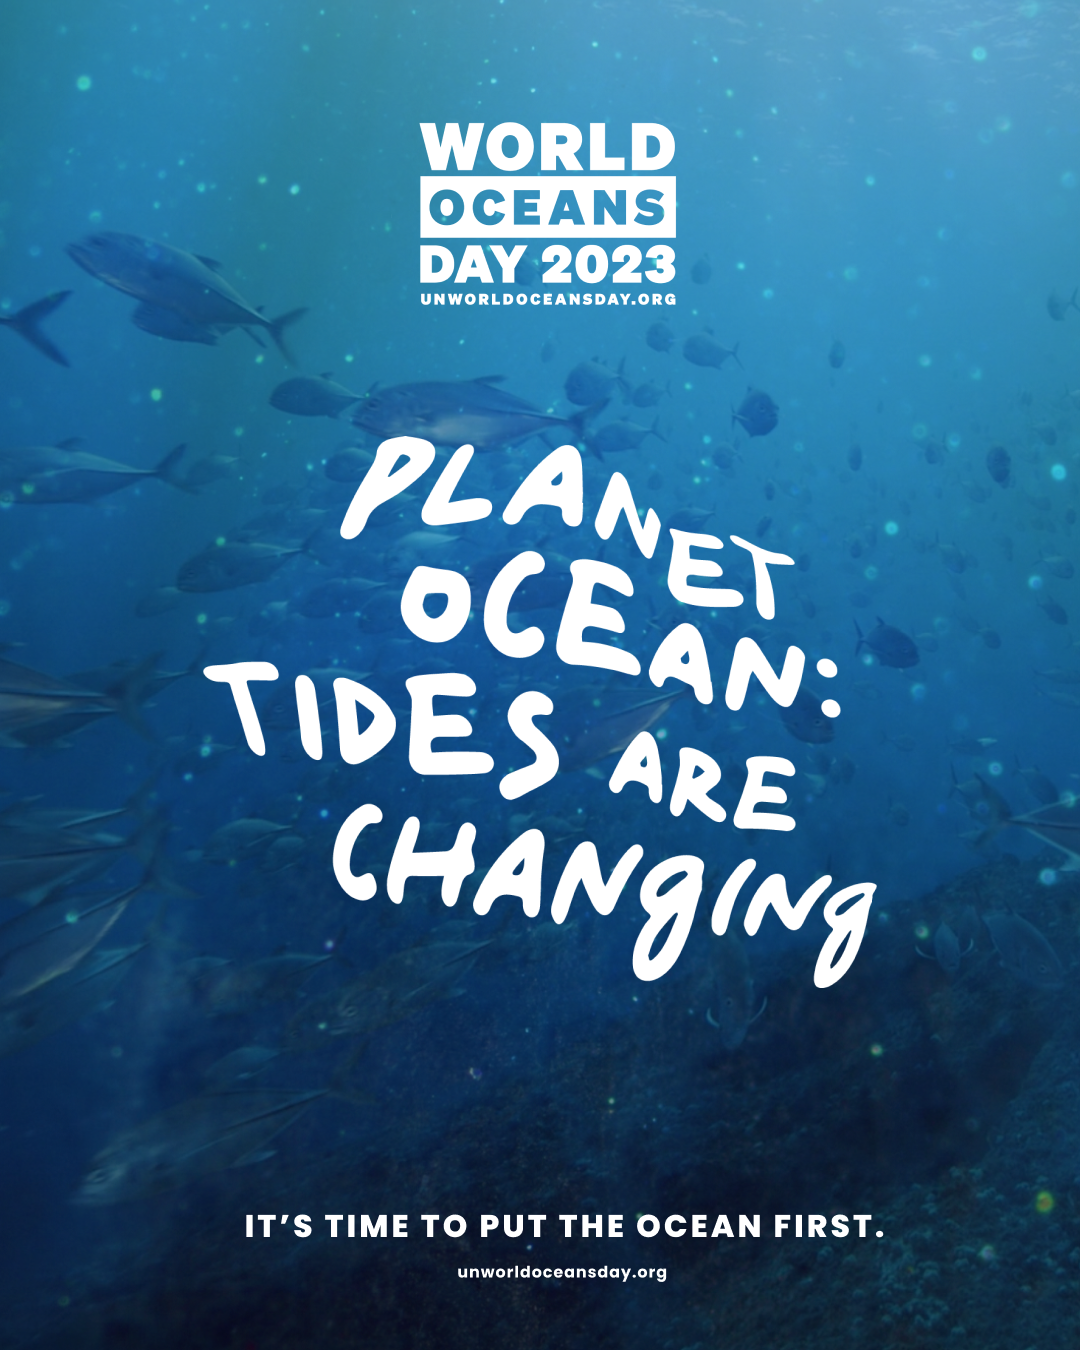 World Oceans Day 2023 poster that reads: planet ocean: tides are changing, underwater.